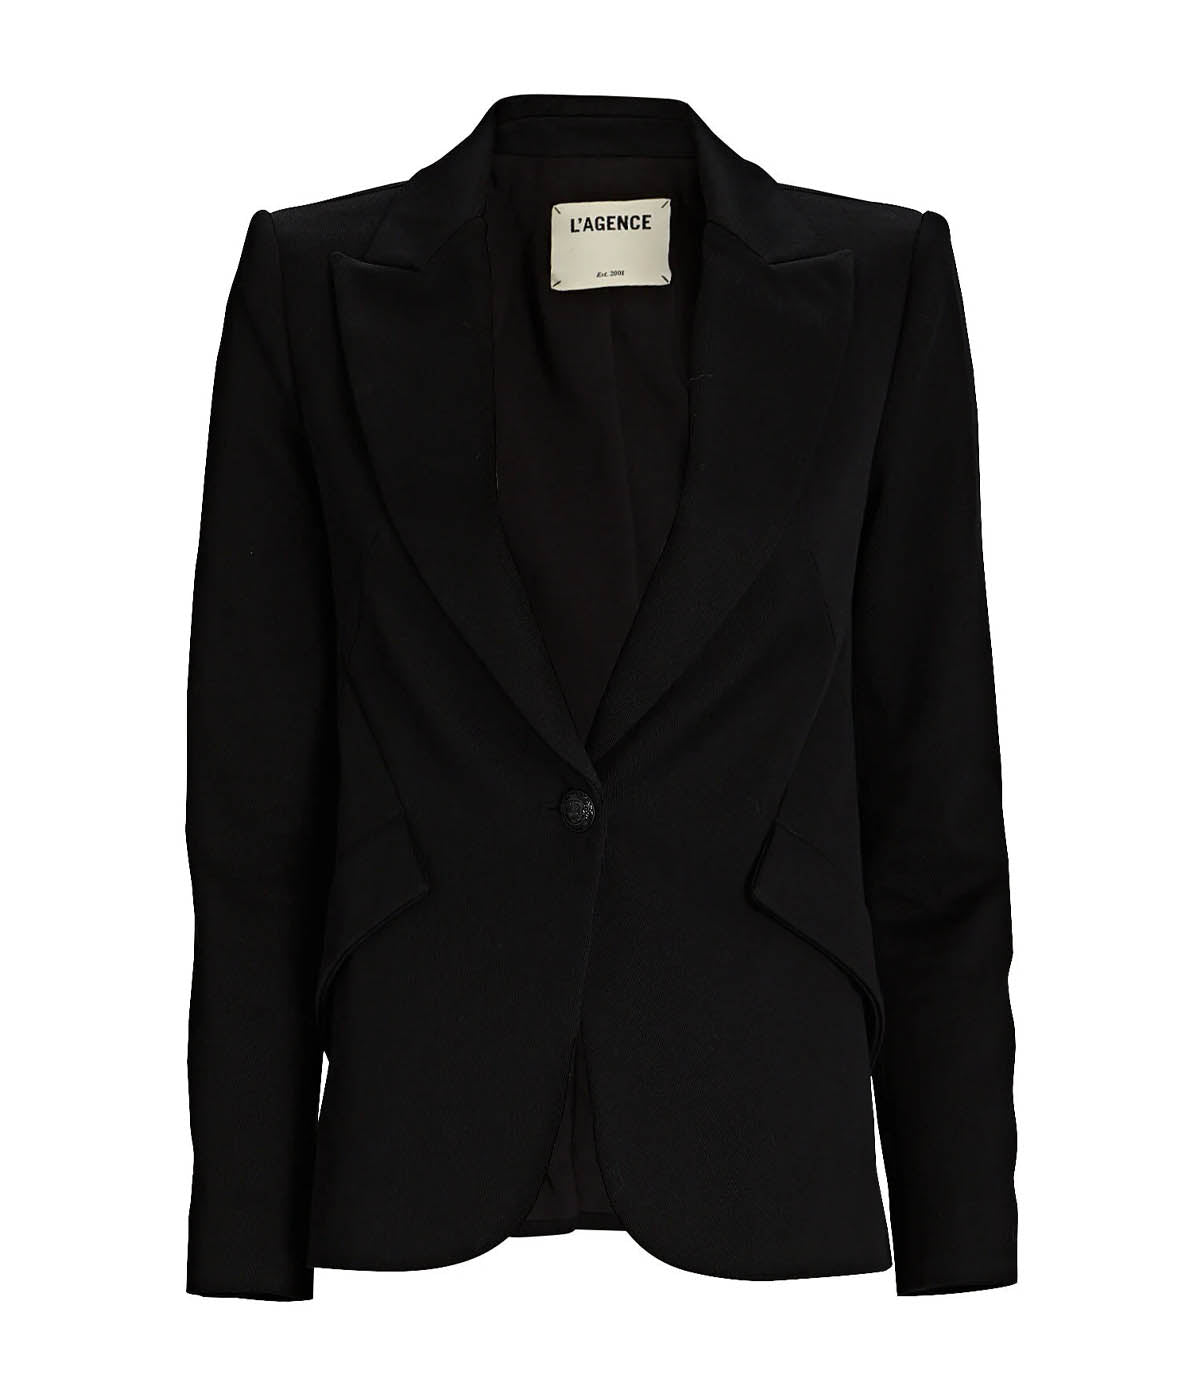 Image of a classic chic black blazer, with one button closure, textured cotton, strong shoulders, peaked lapels, flap pockets. Workwear, basic blazer, classic look, made in USA.  